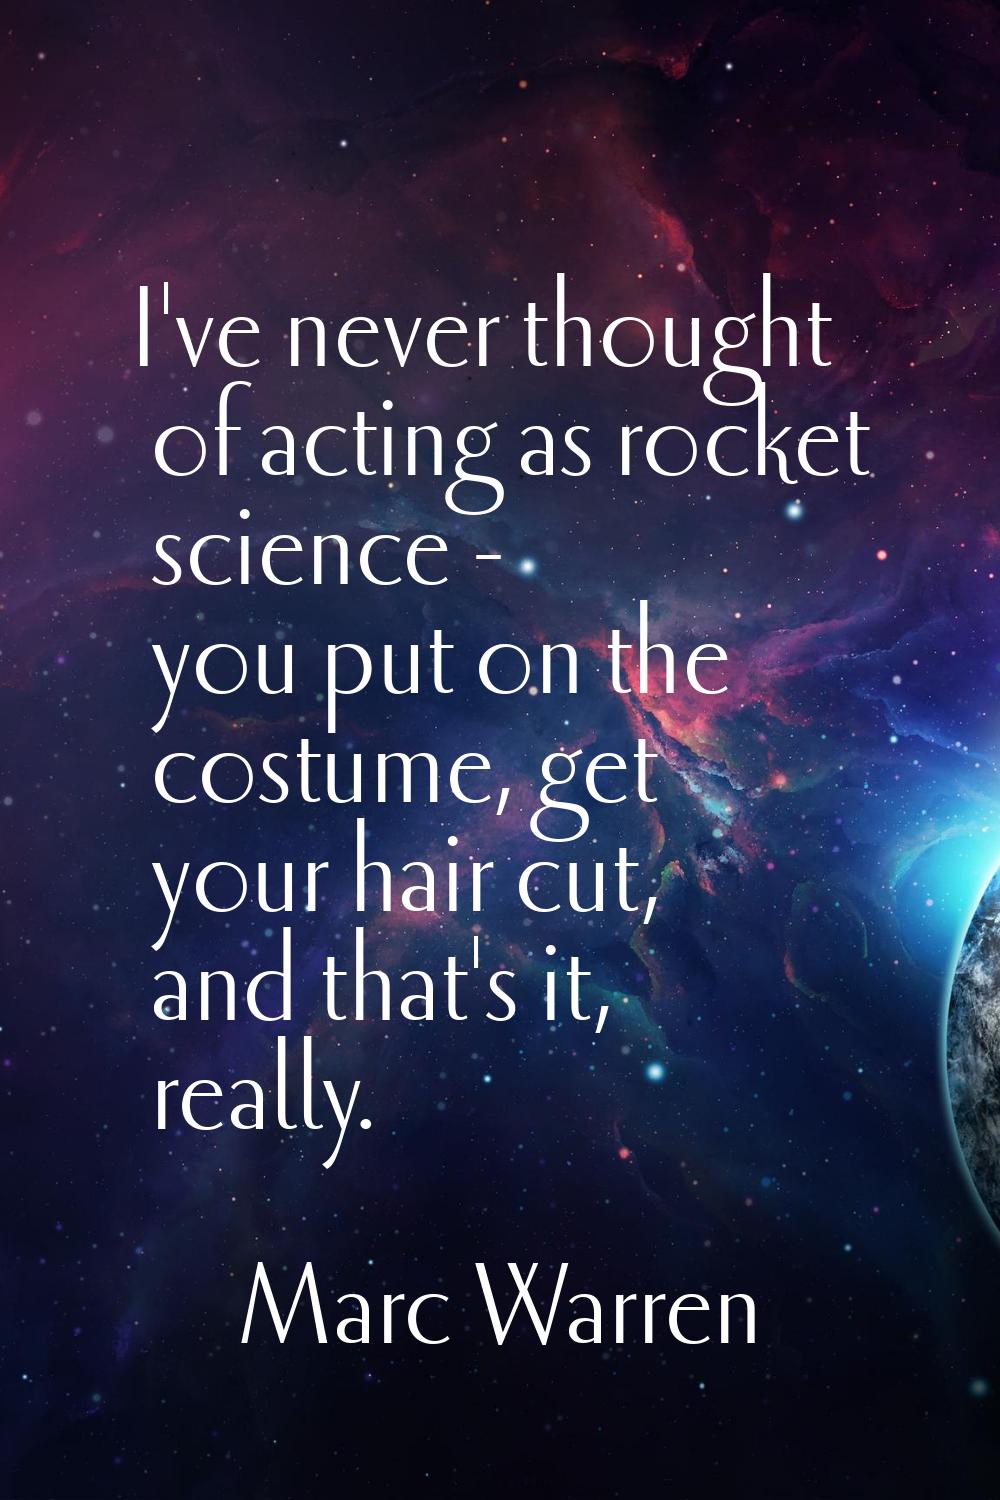 I've never thought of acting as rocket science - you put on the costume, get your hair cut, and tha